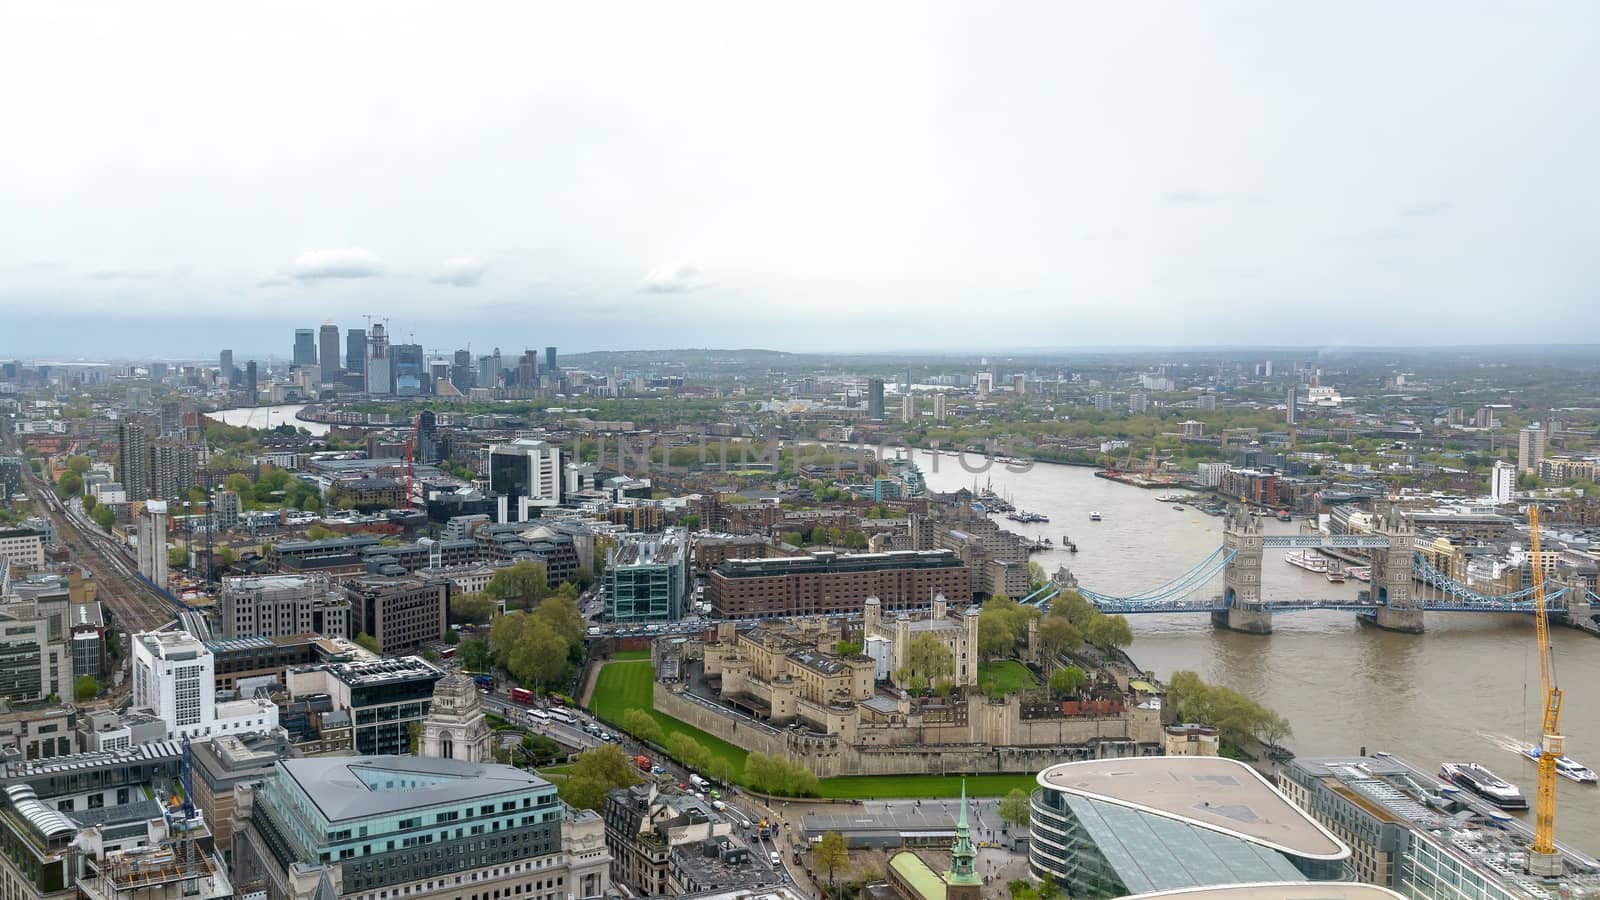 Panorama of London on a cloudy day by mkos83